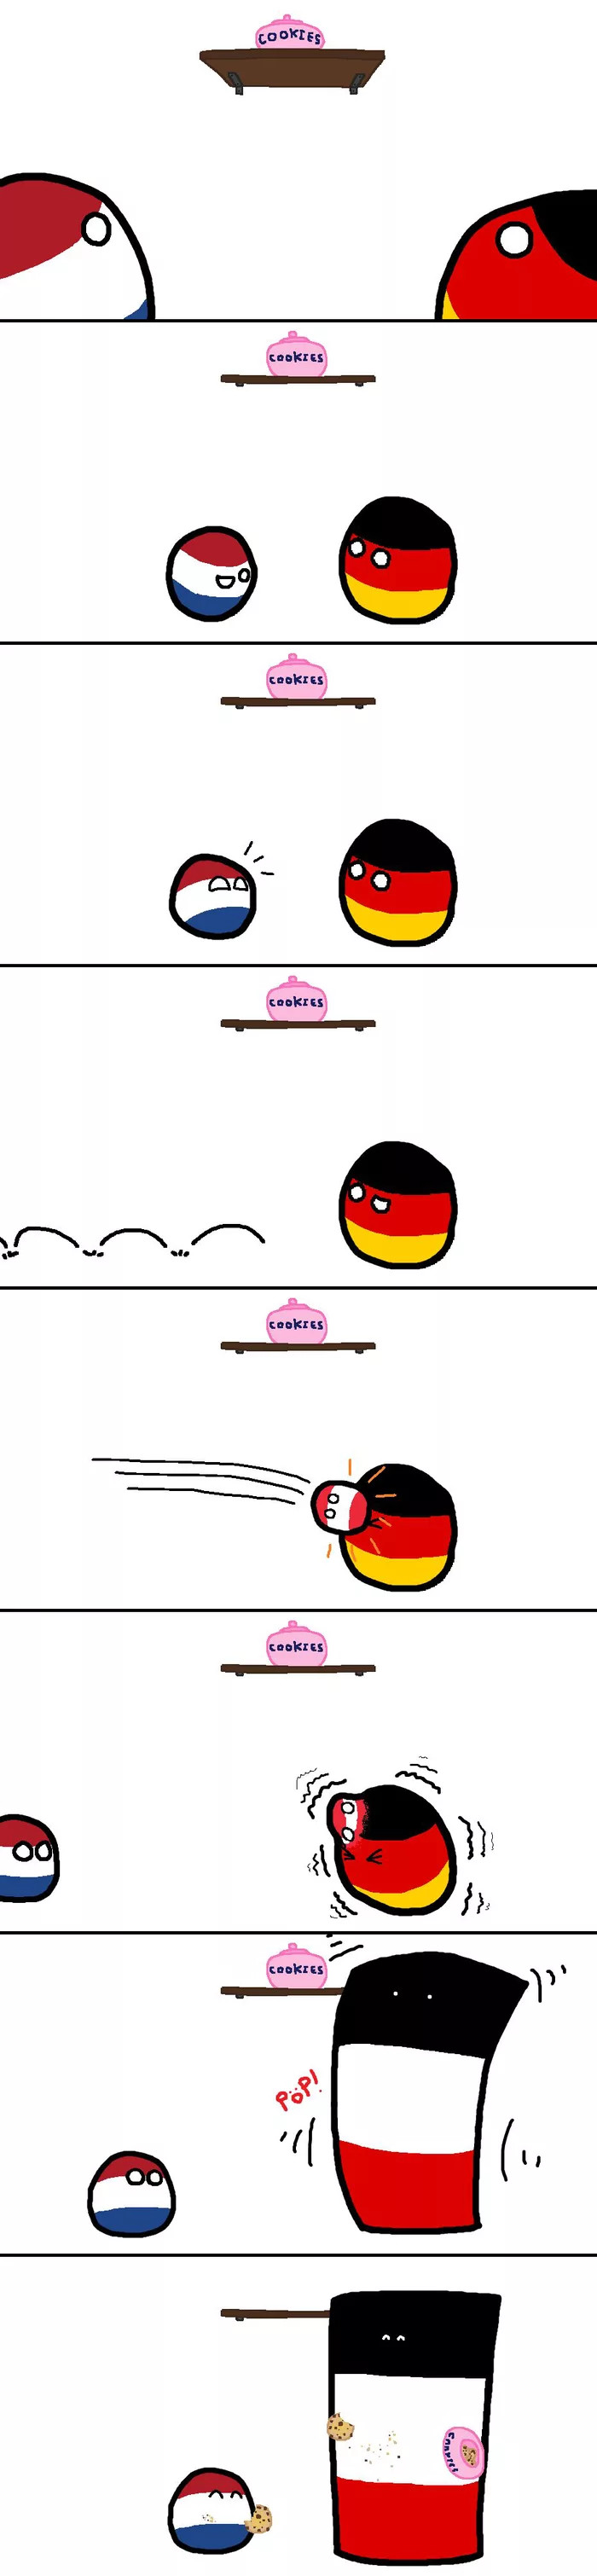 How to get a cookie - Countryballs, Netherlands, Germany, Austria, Anschluss, Longpost, Netherlands (Holland)